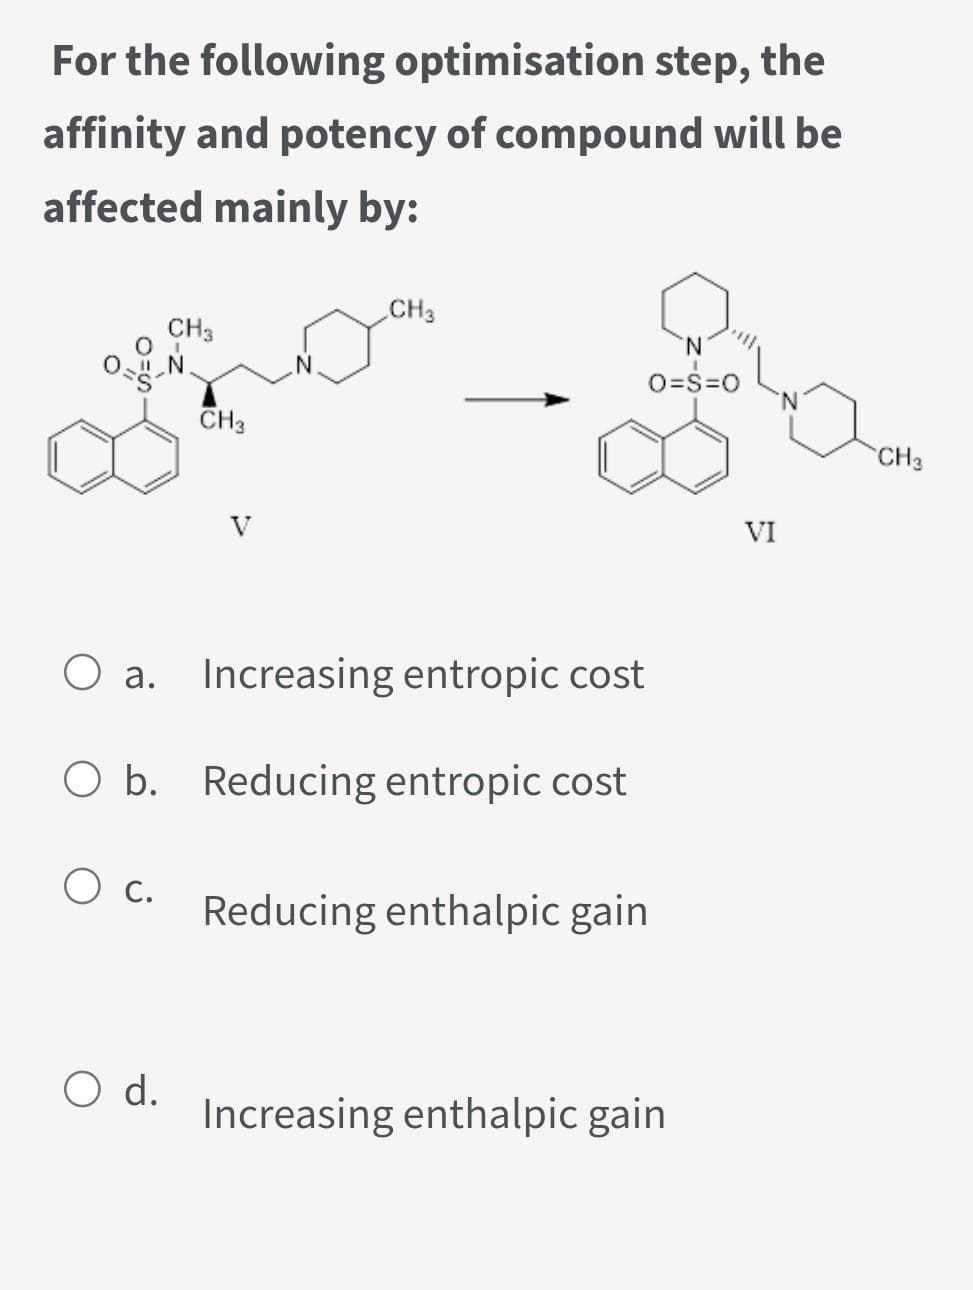 For the following optimisation step, the
affinity and potency of compound will be
affected mainly by:
0-g-
O c.
CH3
O d.
CH3
O a. Increasing entropic cost
O b. Reducing entropic cost
CH3
Reducing enthalpic gain
O=S=O
Increasing enthalpic gain
VI
CH 3